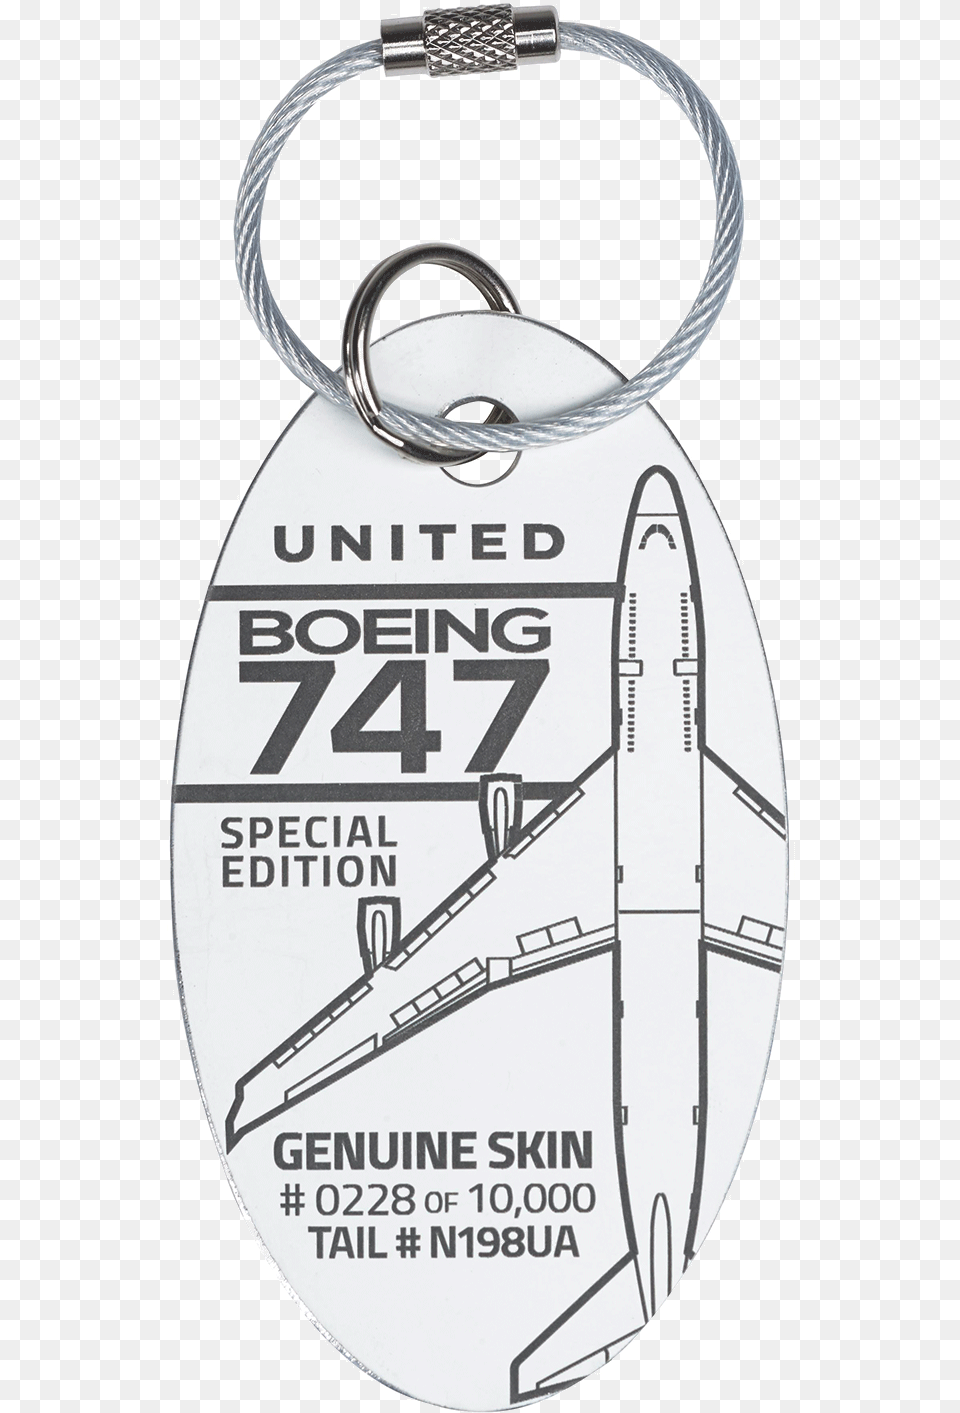 United Airlines Boeing 747 N198ua Planetag Keychain, Accessories Png